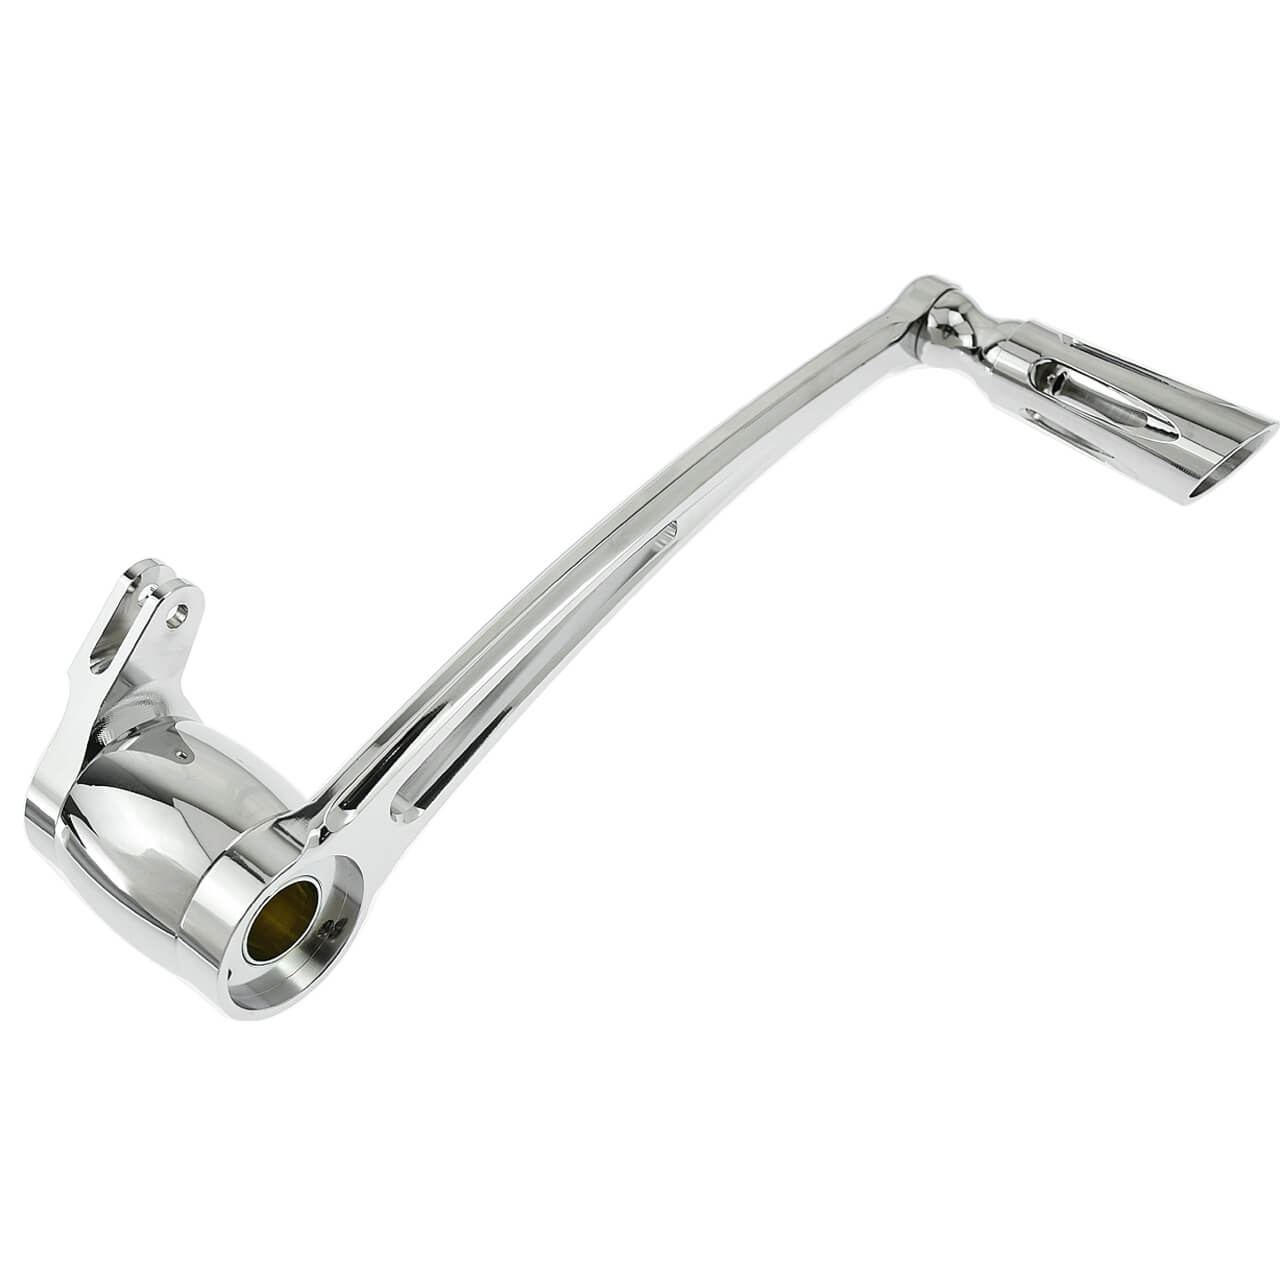 PE003201-mactions-brake-arm-lever-for-harley-chrome